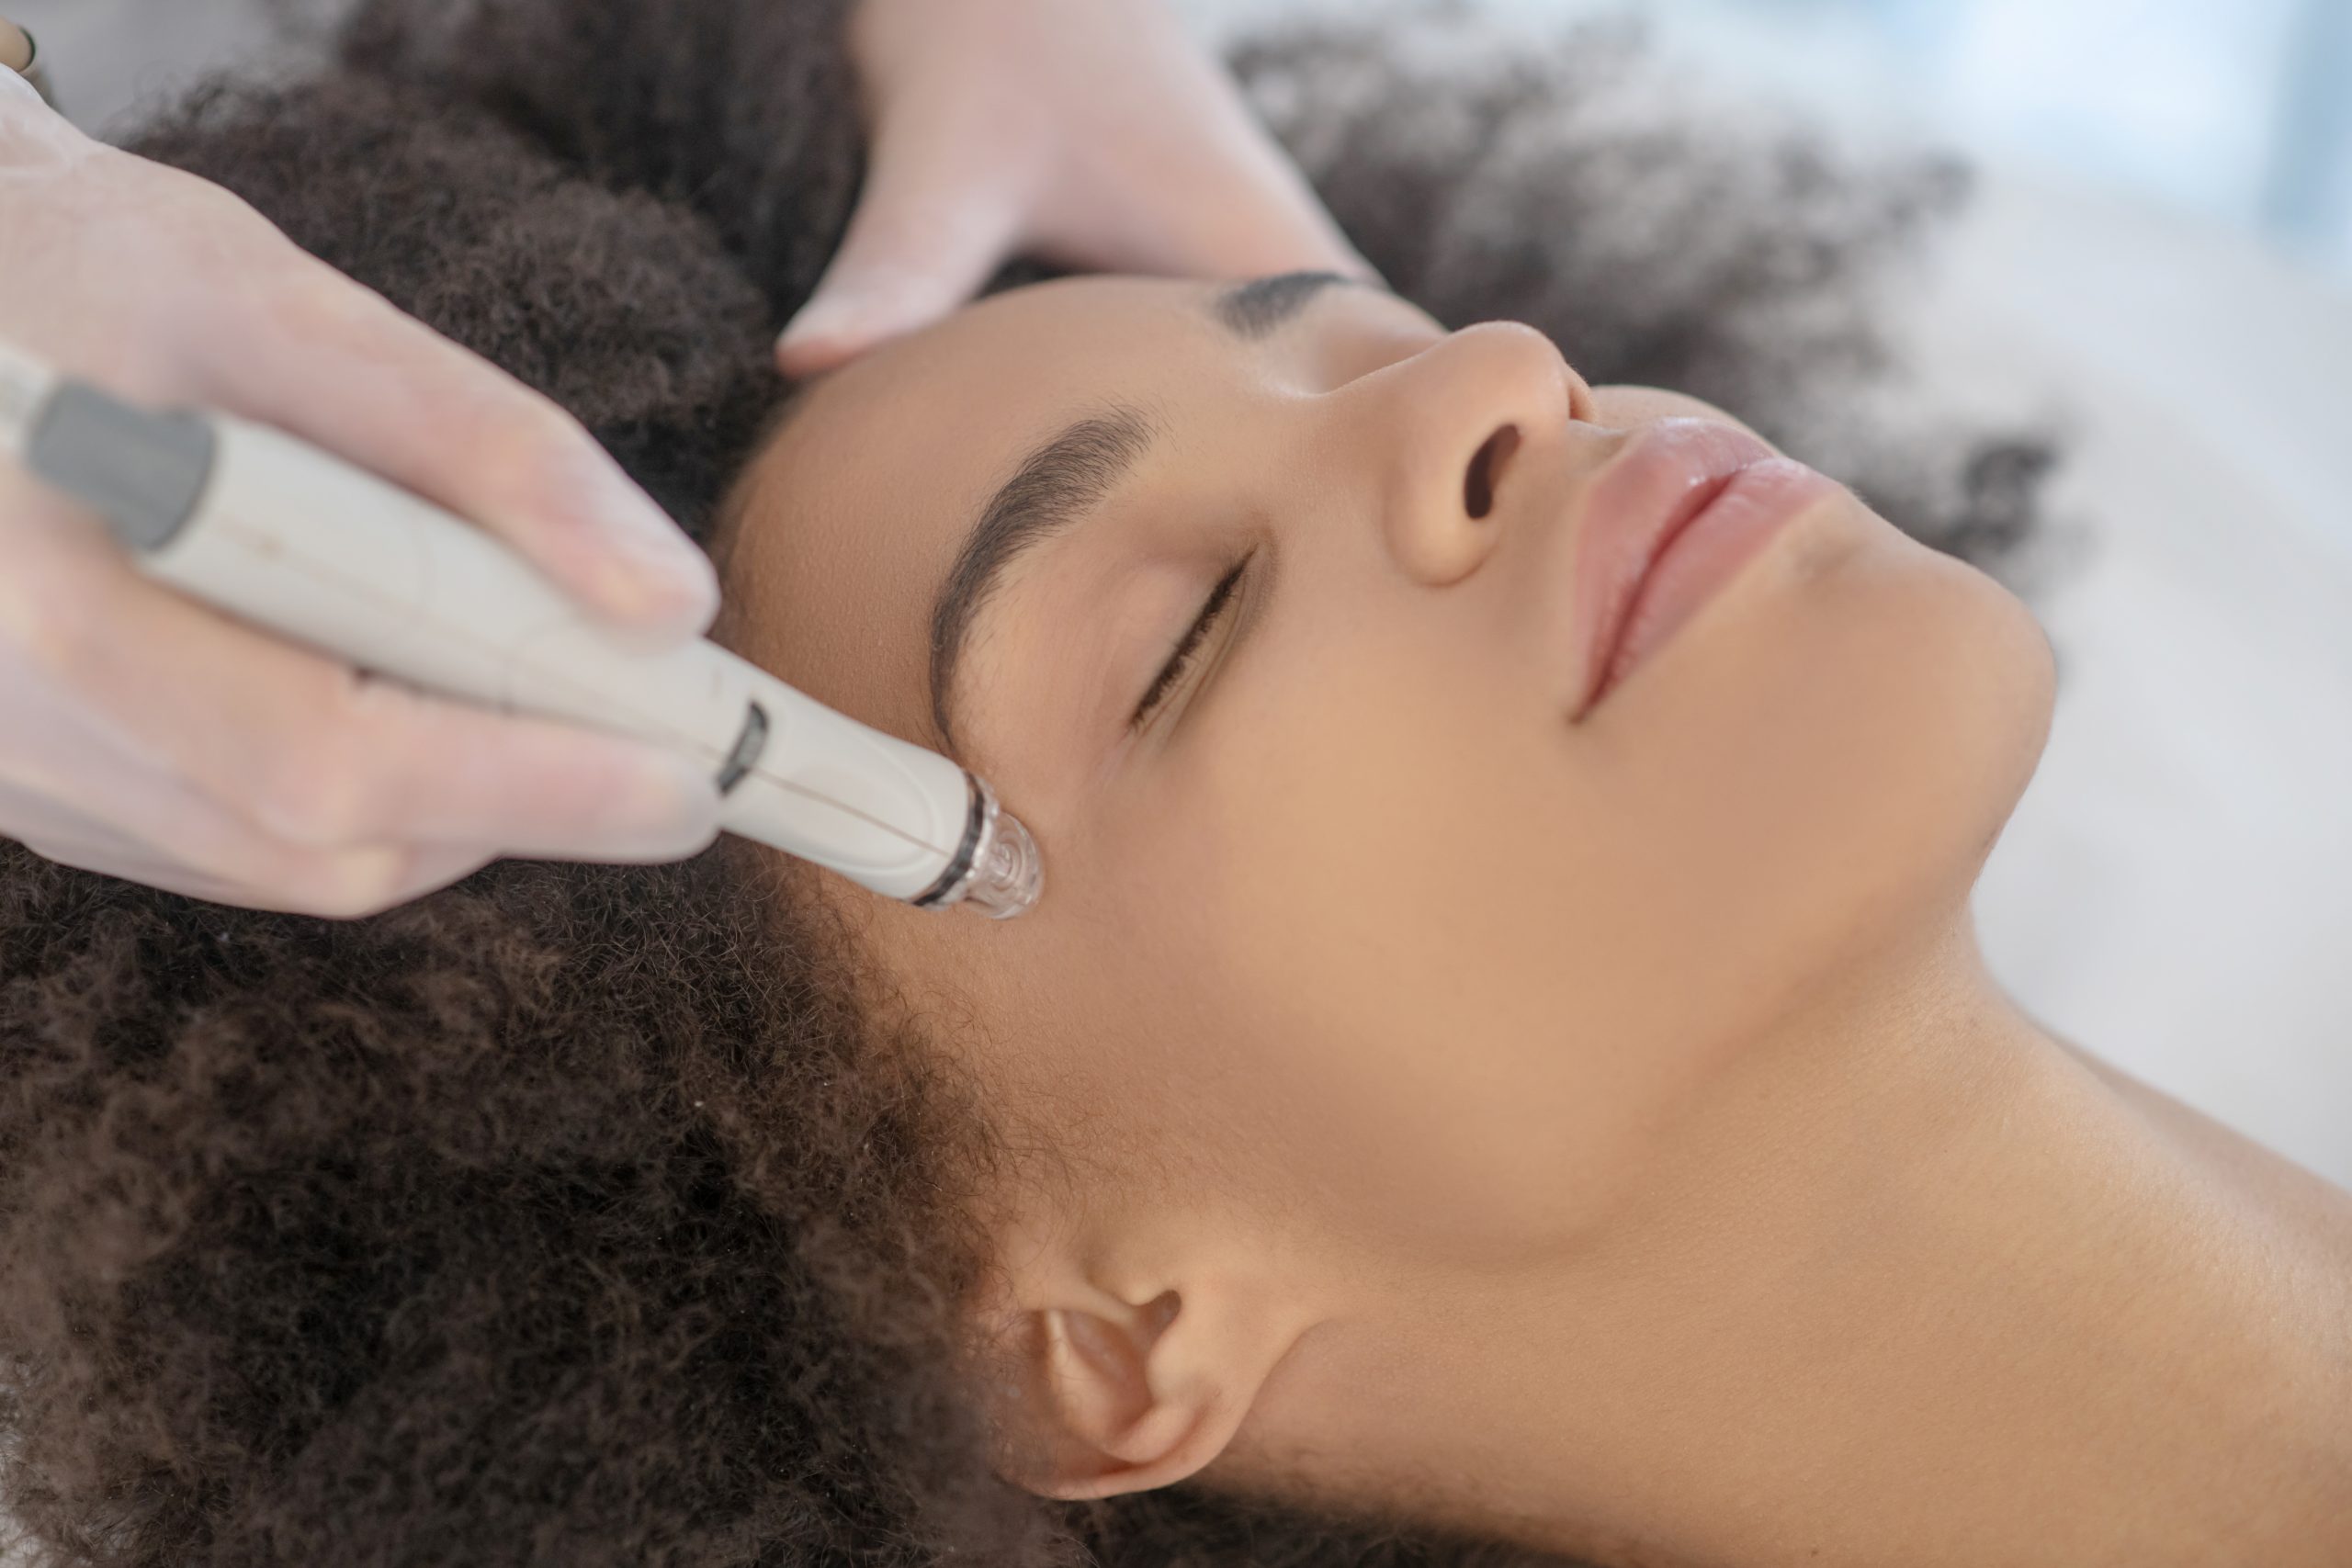 HydraFacial is the only hydra dermabrasion procedure that combines cleansing, extraction and hydration simultaneously for clearer skin.